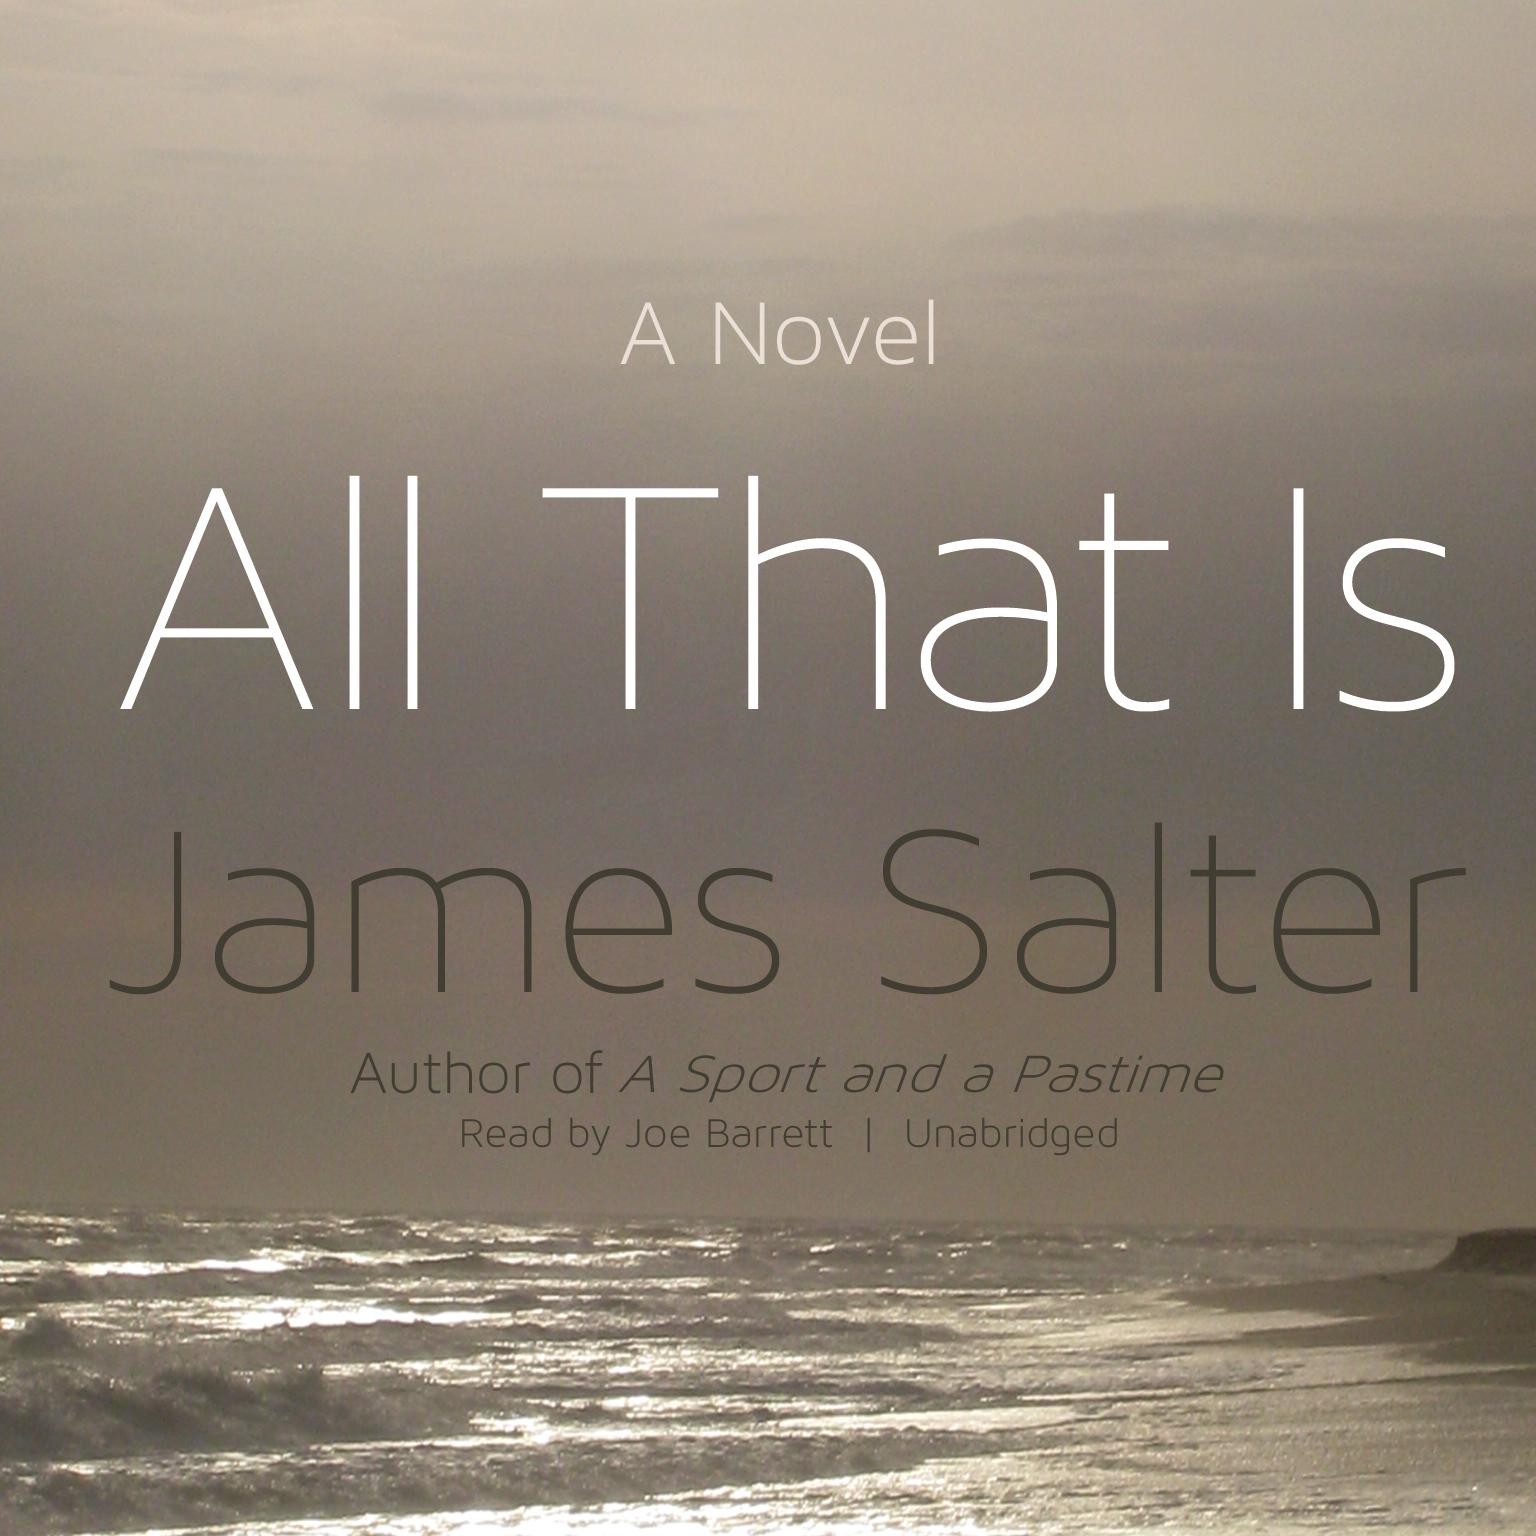 All That Is: A Novel Audiobook, by James Salter